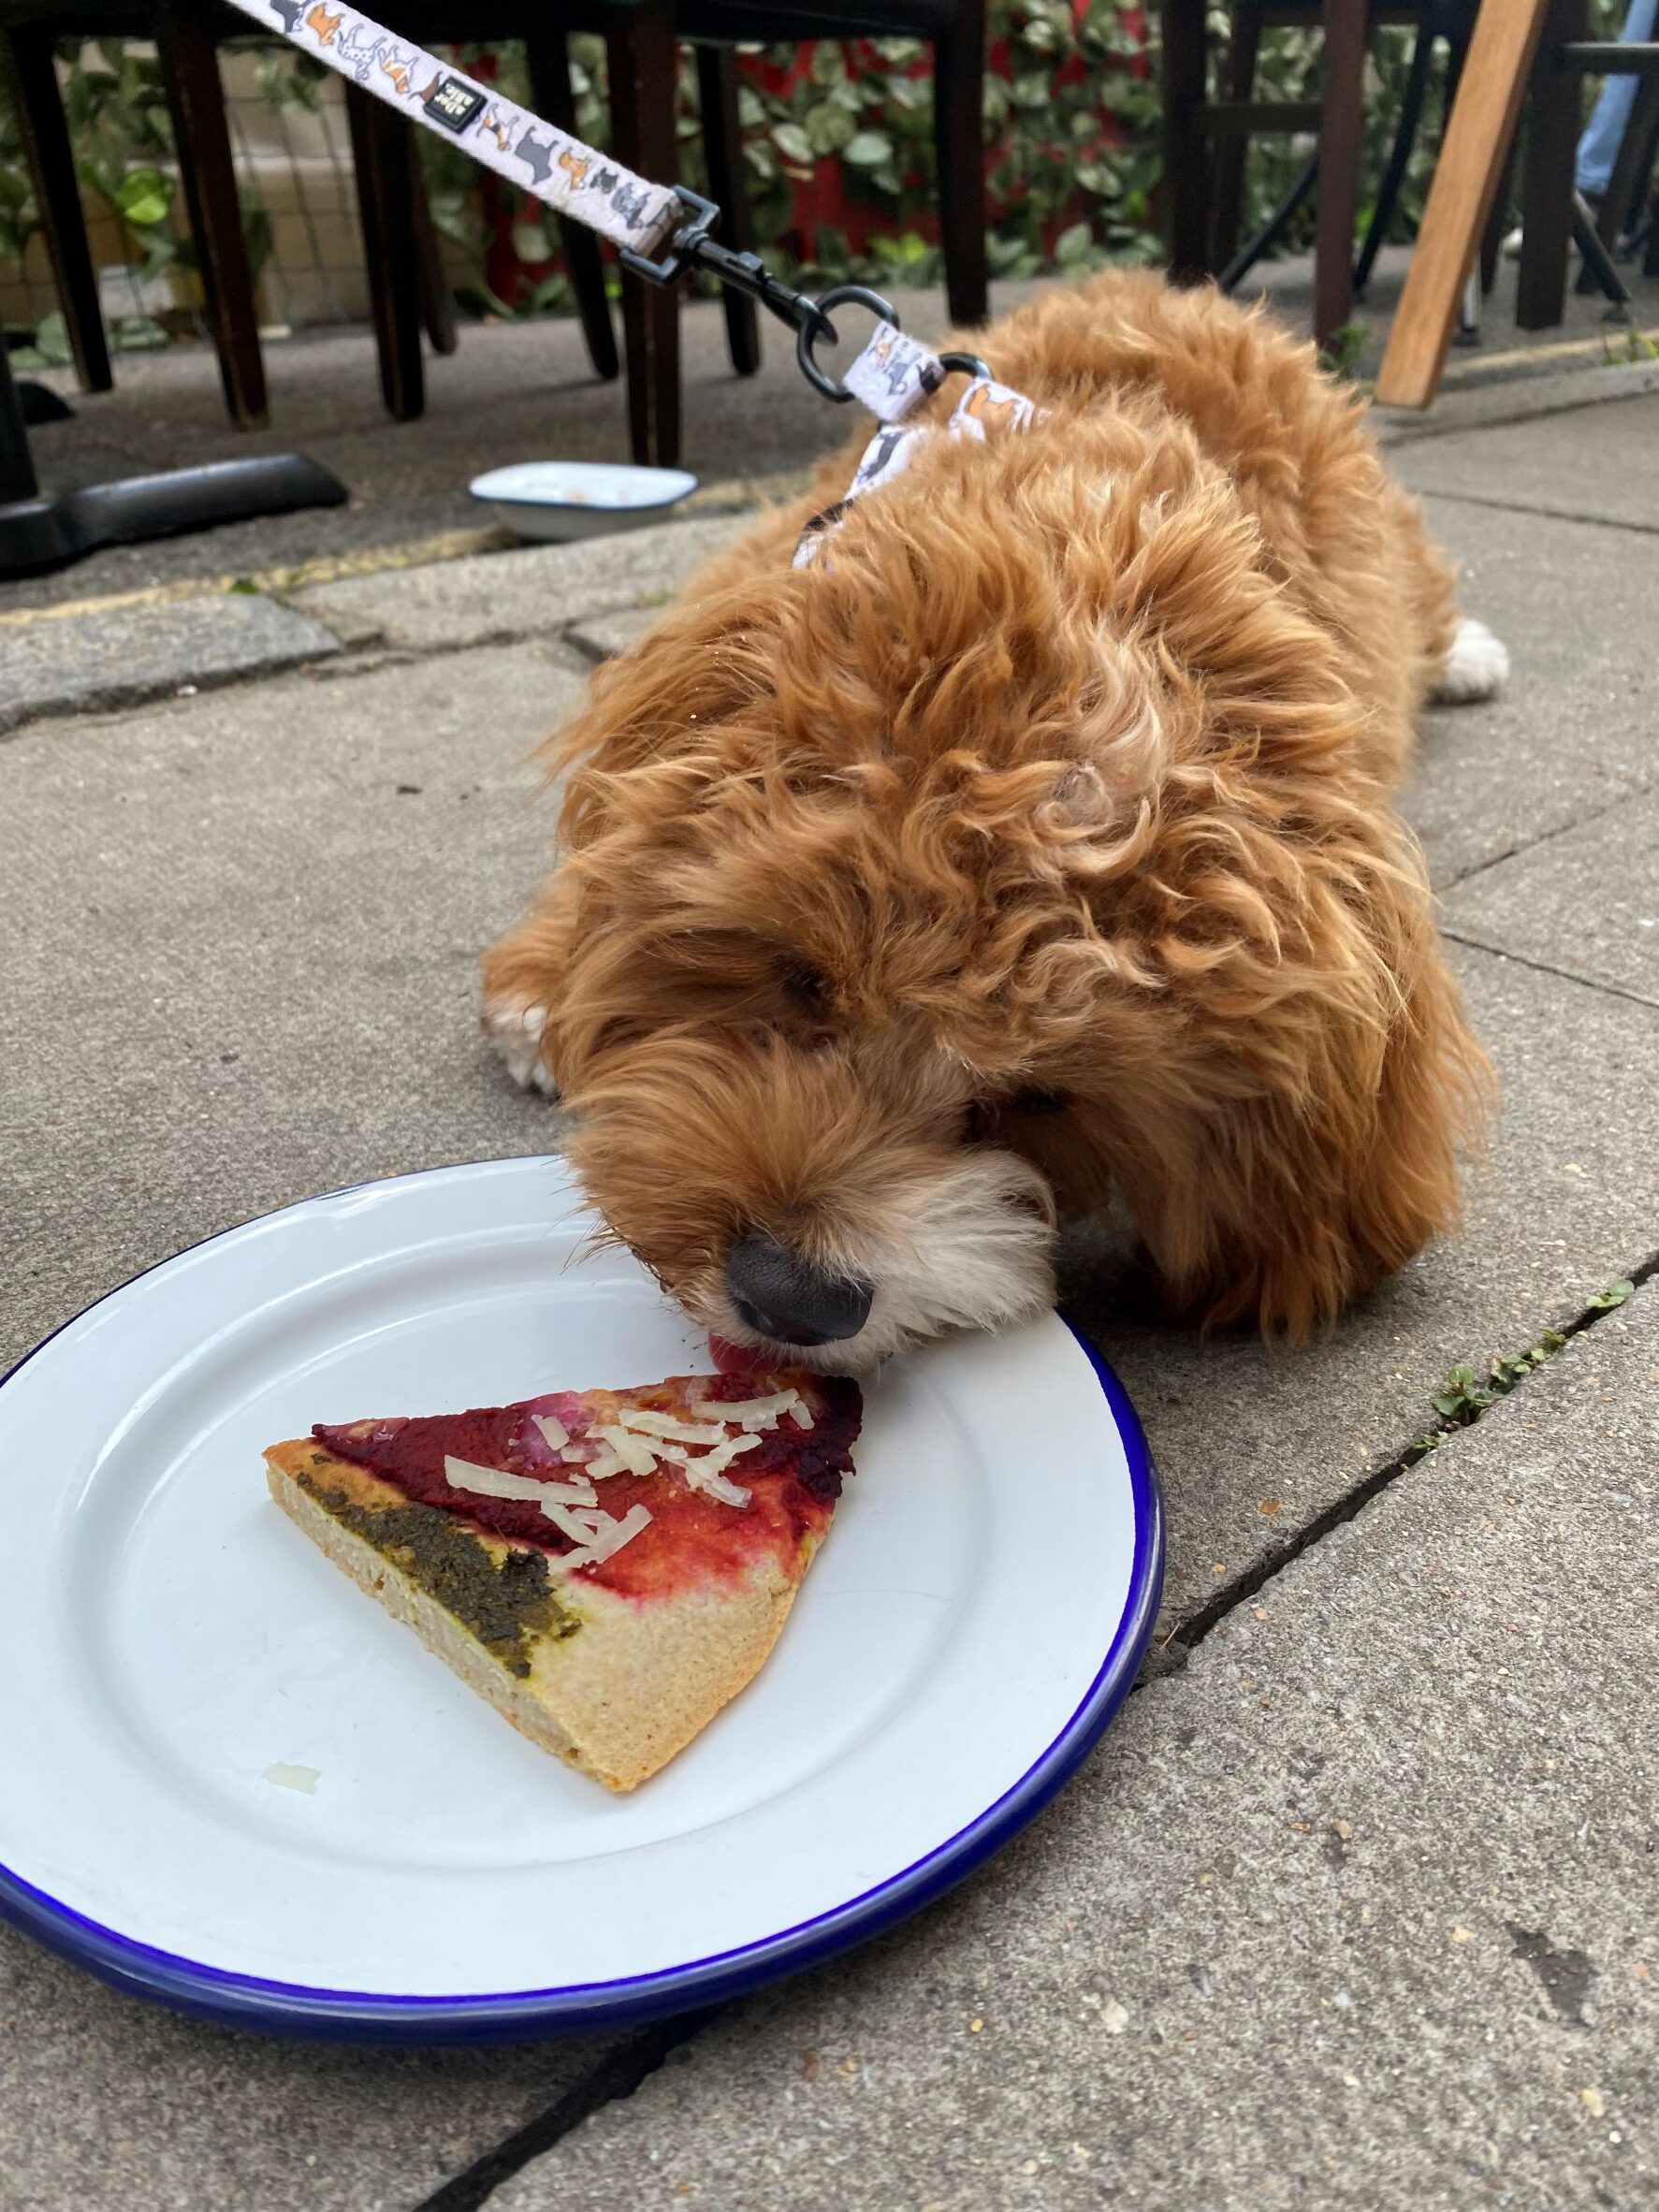 Little golden cavapoo puppy eats a slice of Barkino's pizza off a plate outside Catalina's restaurant.